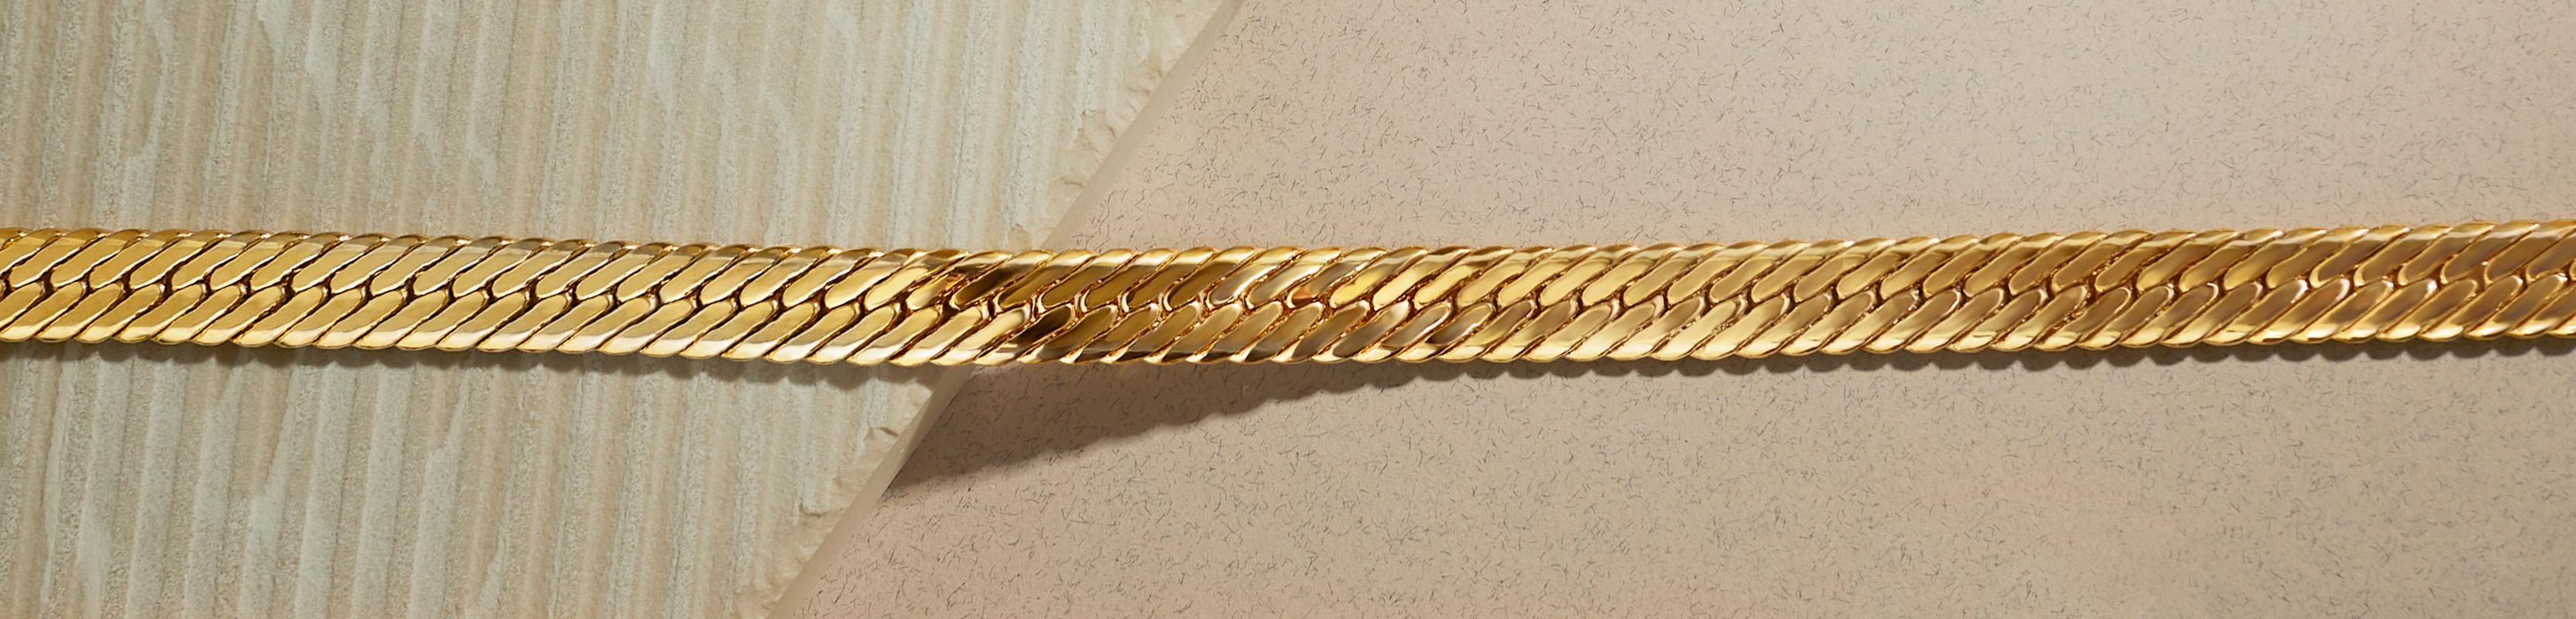 Vintage 1980s Givenchy herringbone chain necklace in gold plate.  This choker-length heritage necklace comprises a flat, wide herringbone chain with a statement double G logo clasp.  Length 16.5 inches, width just over 1/4 inch with a foldover clasp